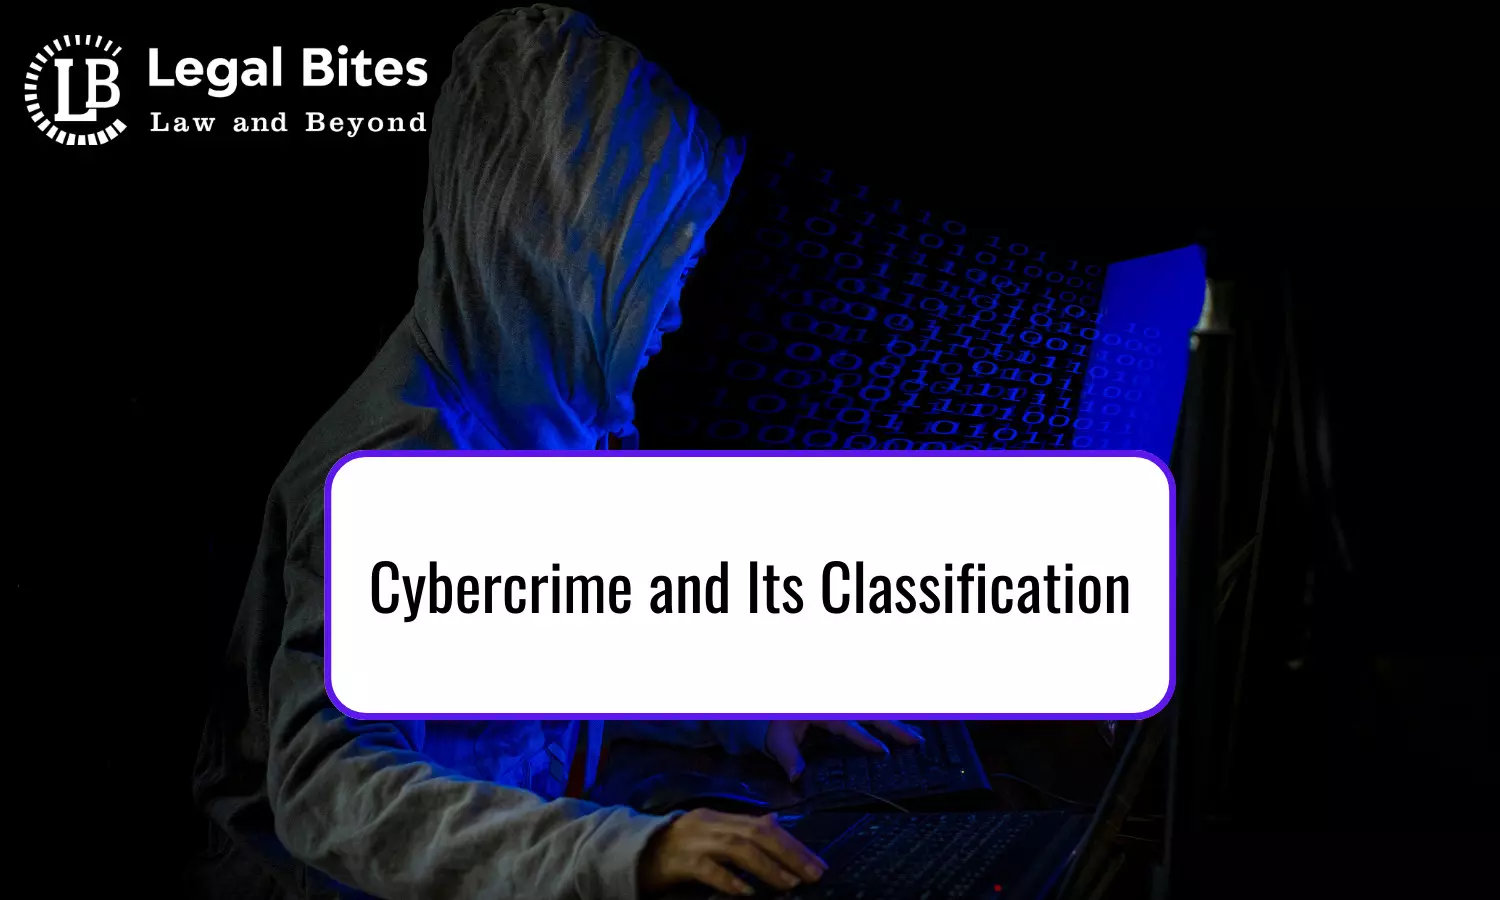 Cybercrime and Its Classification